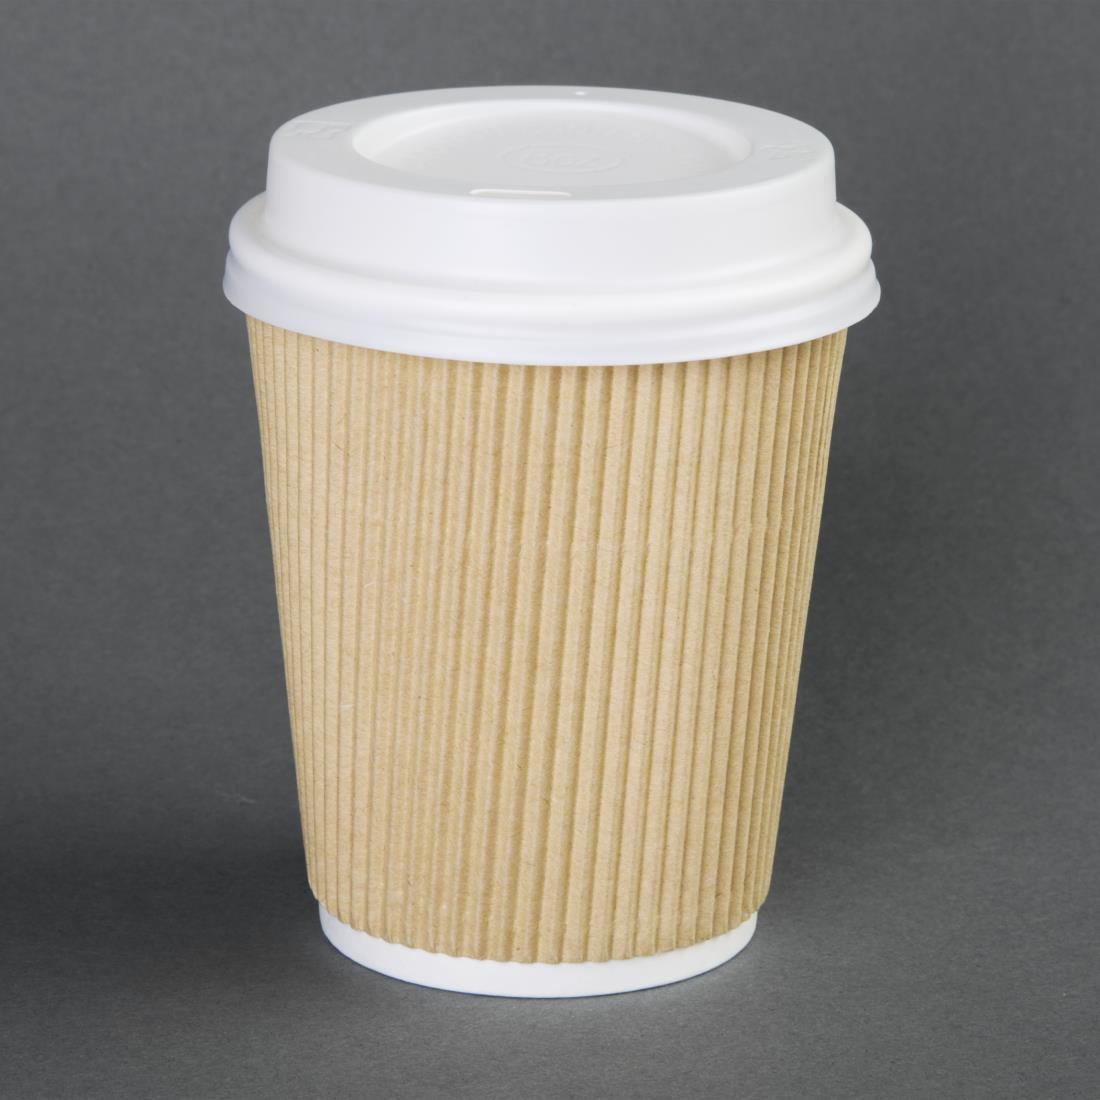 Fiesta Recyclable Coffee Cup Lids White 340ml / 12oz and 455ml / 16oz (Pack of 50) - CE264  - 4